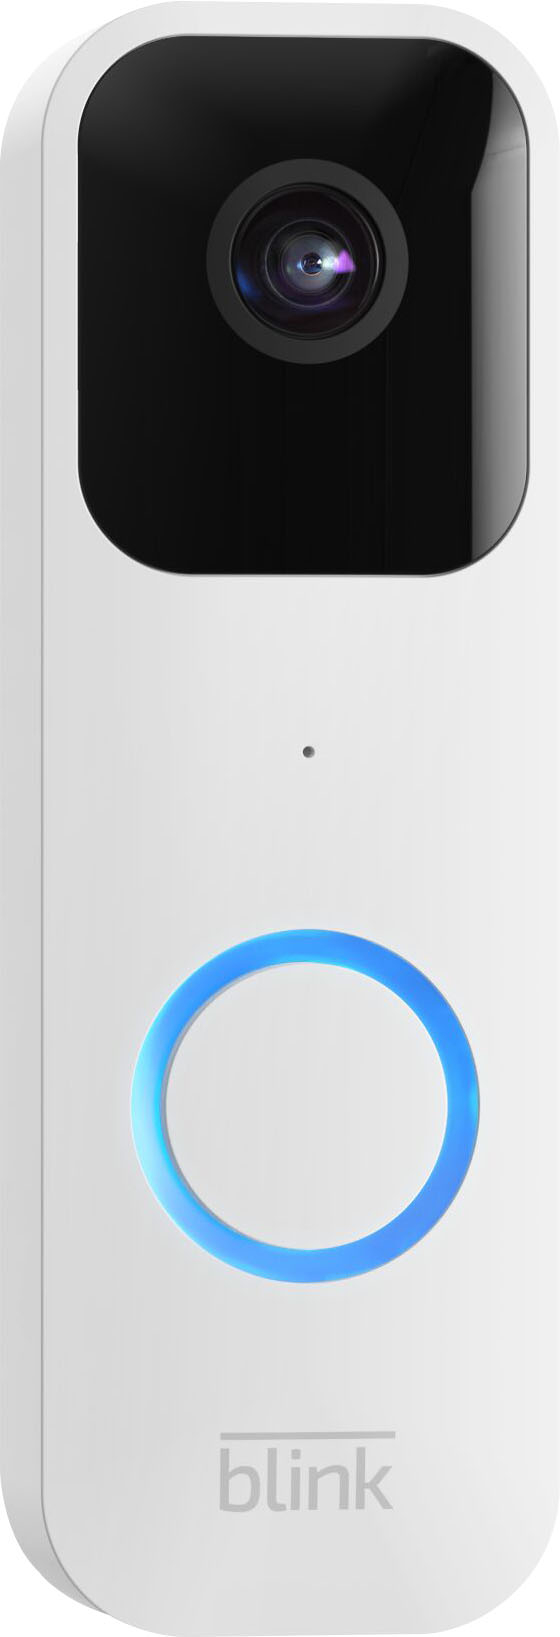 Angle View: Blink - Smart Wifi Video Doorbell – Wired/Battery Operated with Sync Module 2 - White